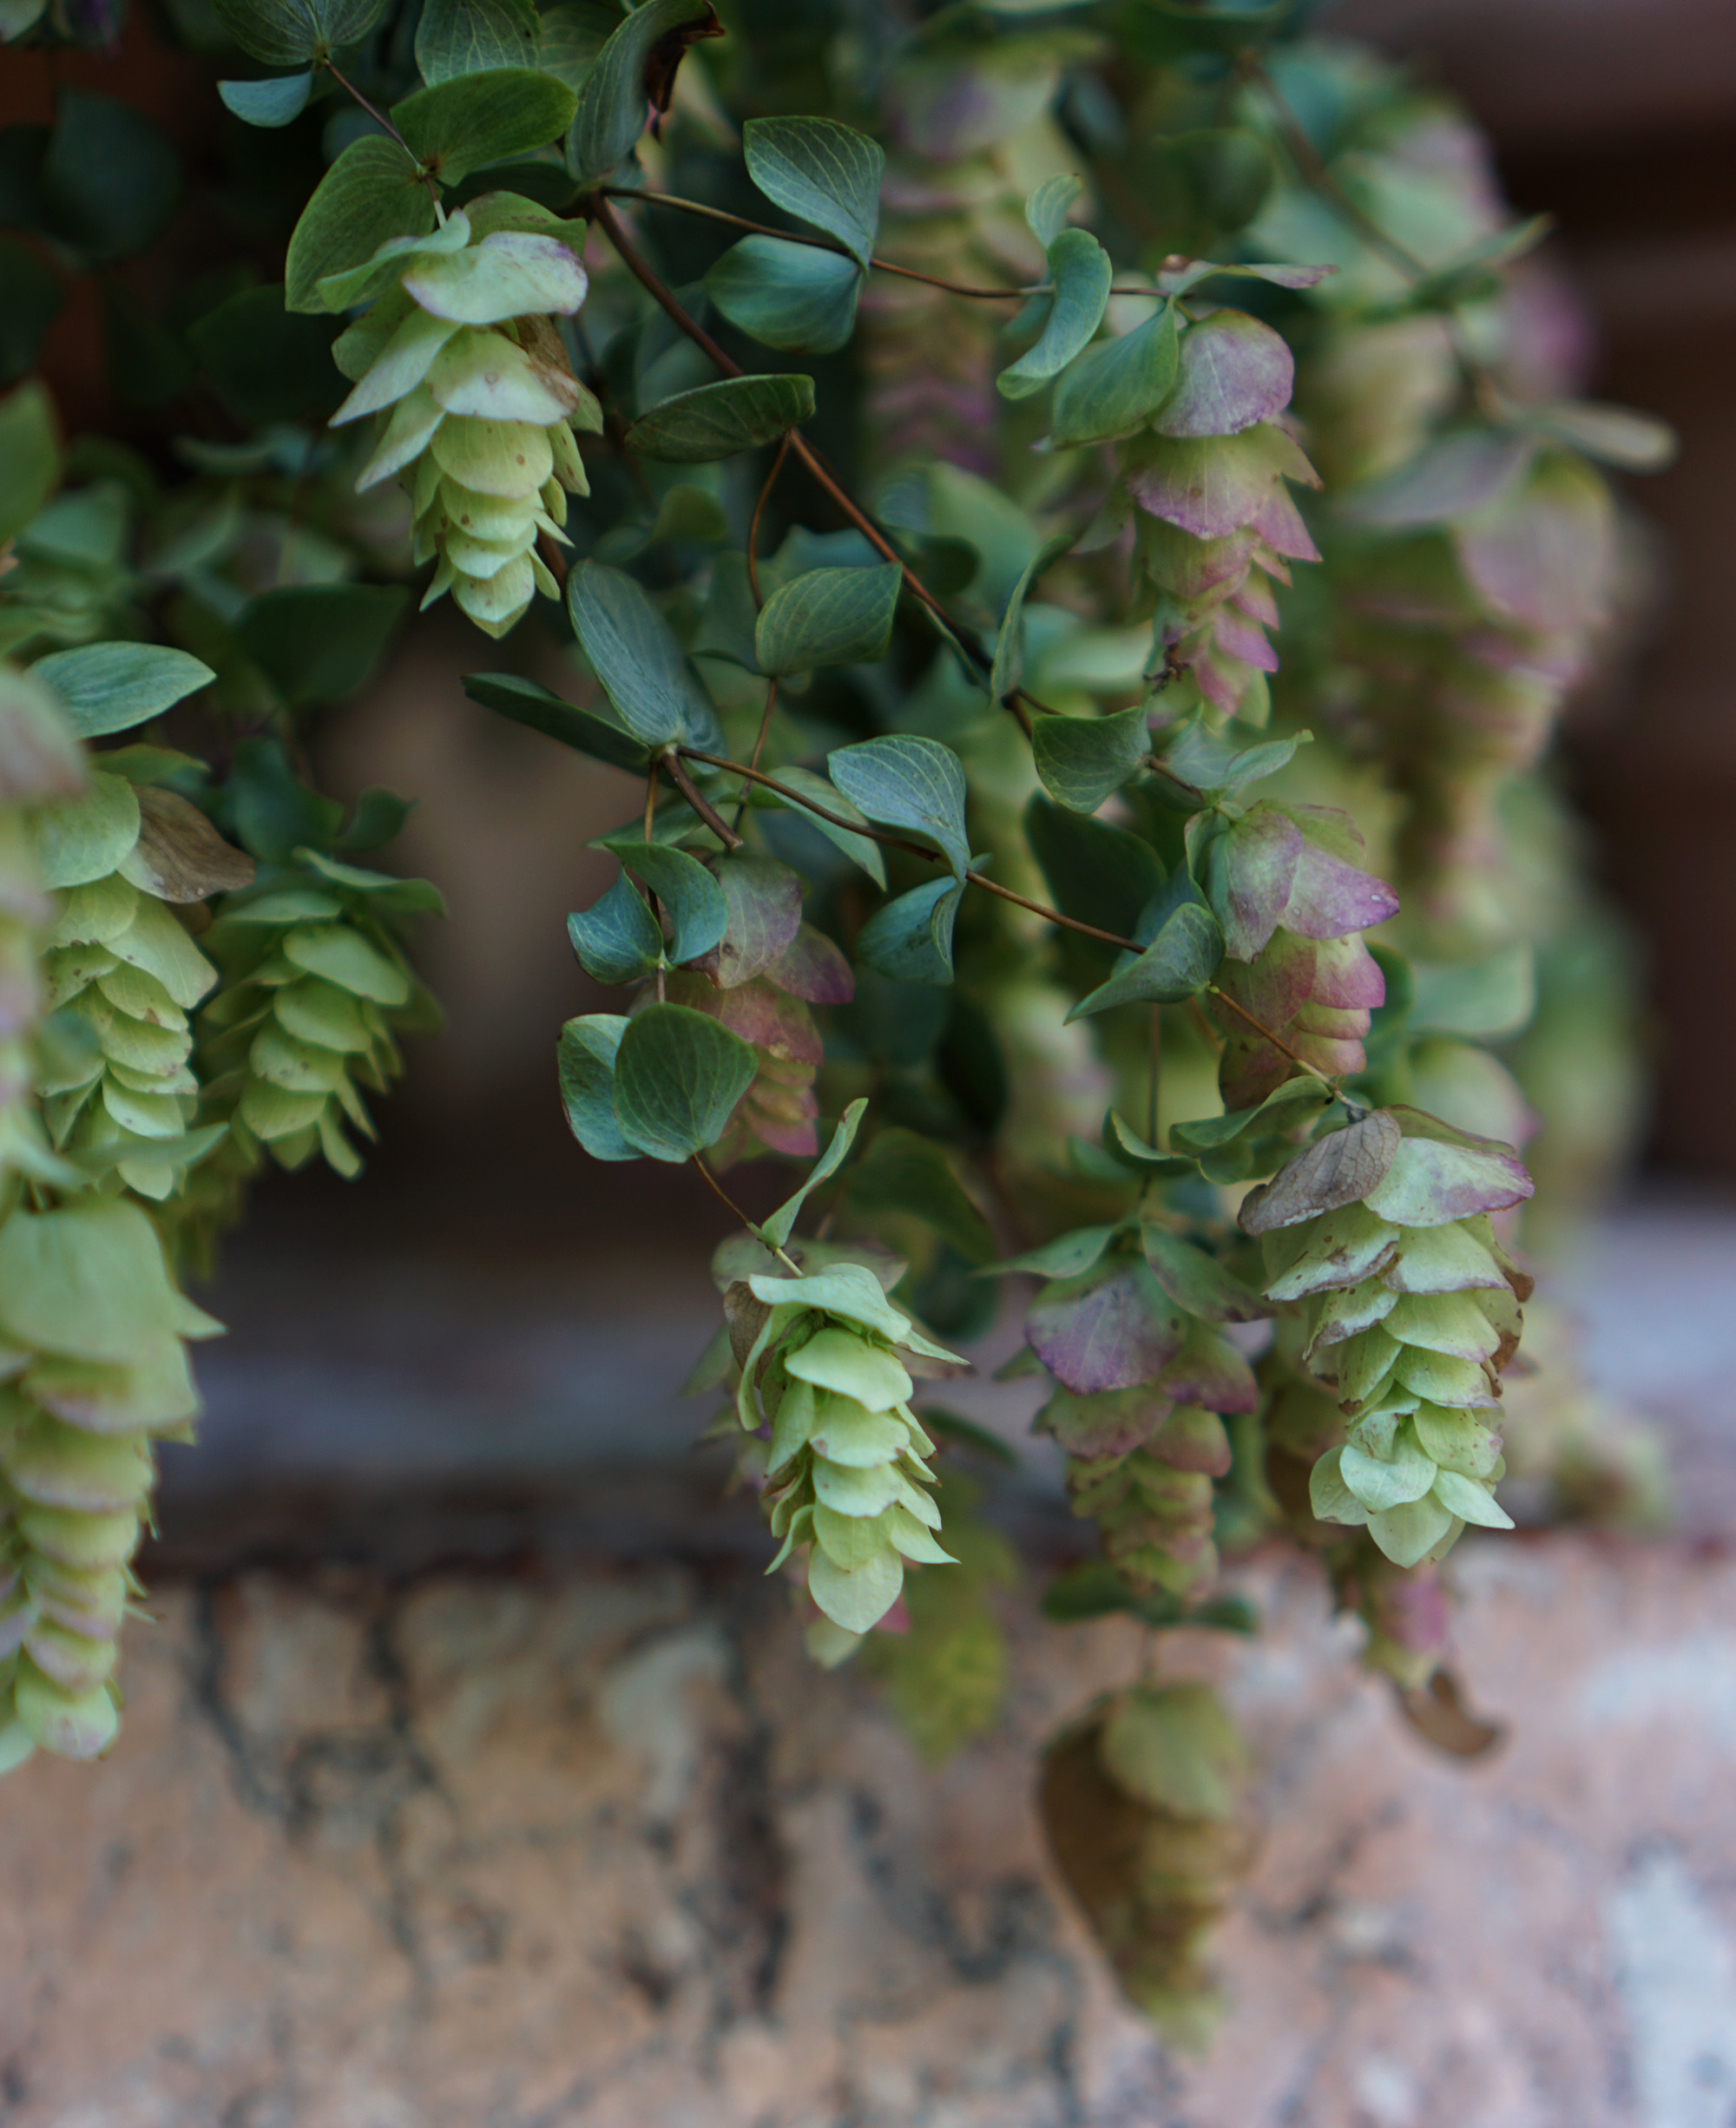 Hops in a garden at the Cloisters, New York City / Darker than Green